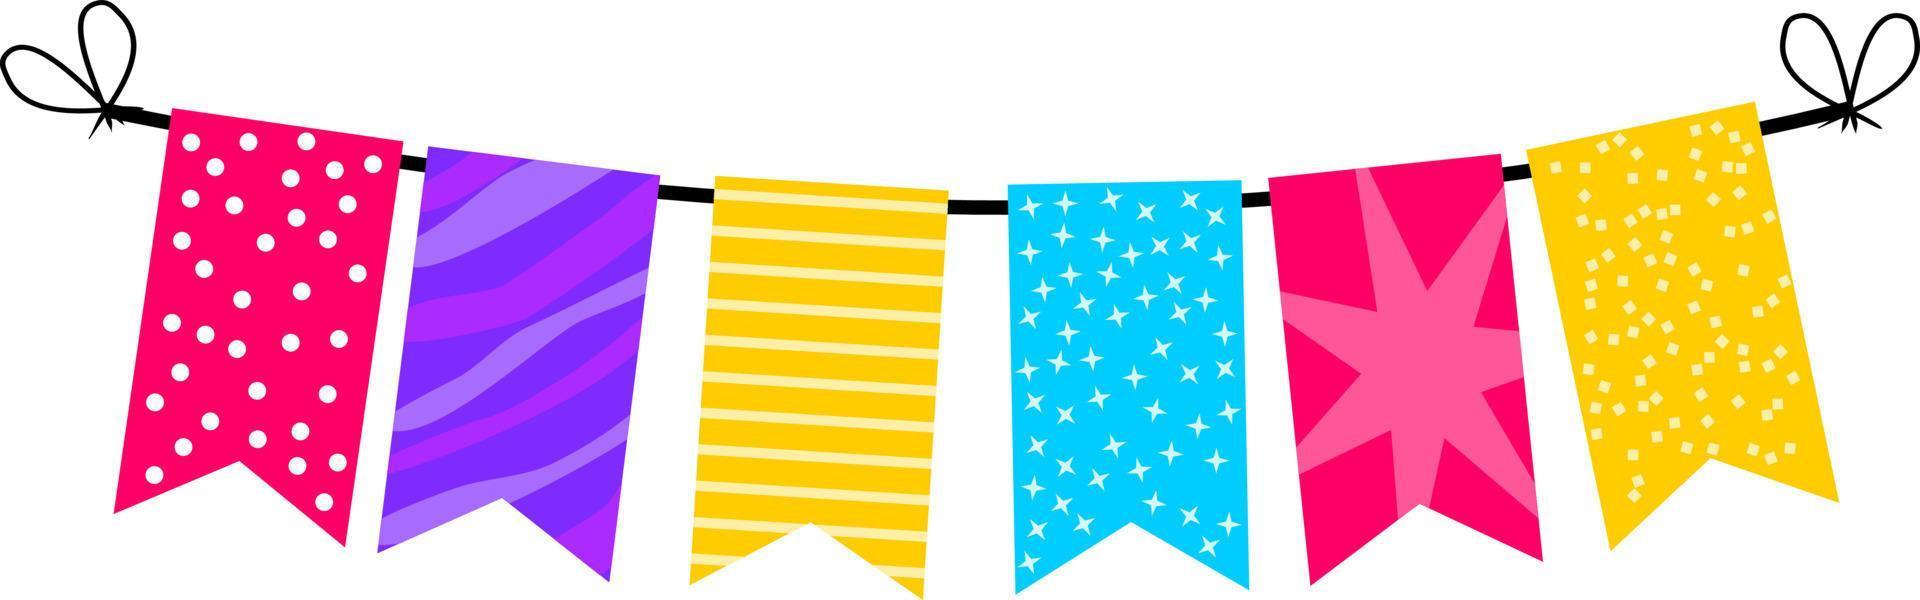 bunting banner party. vector